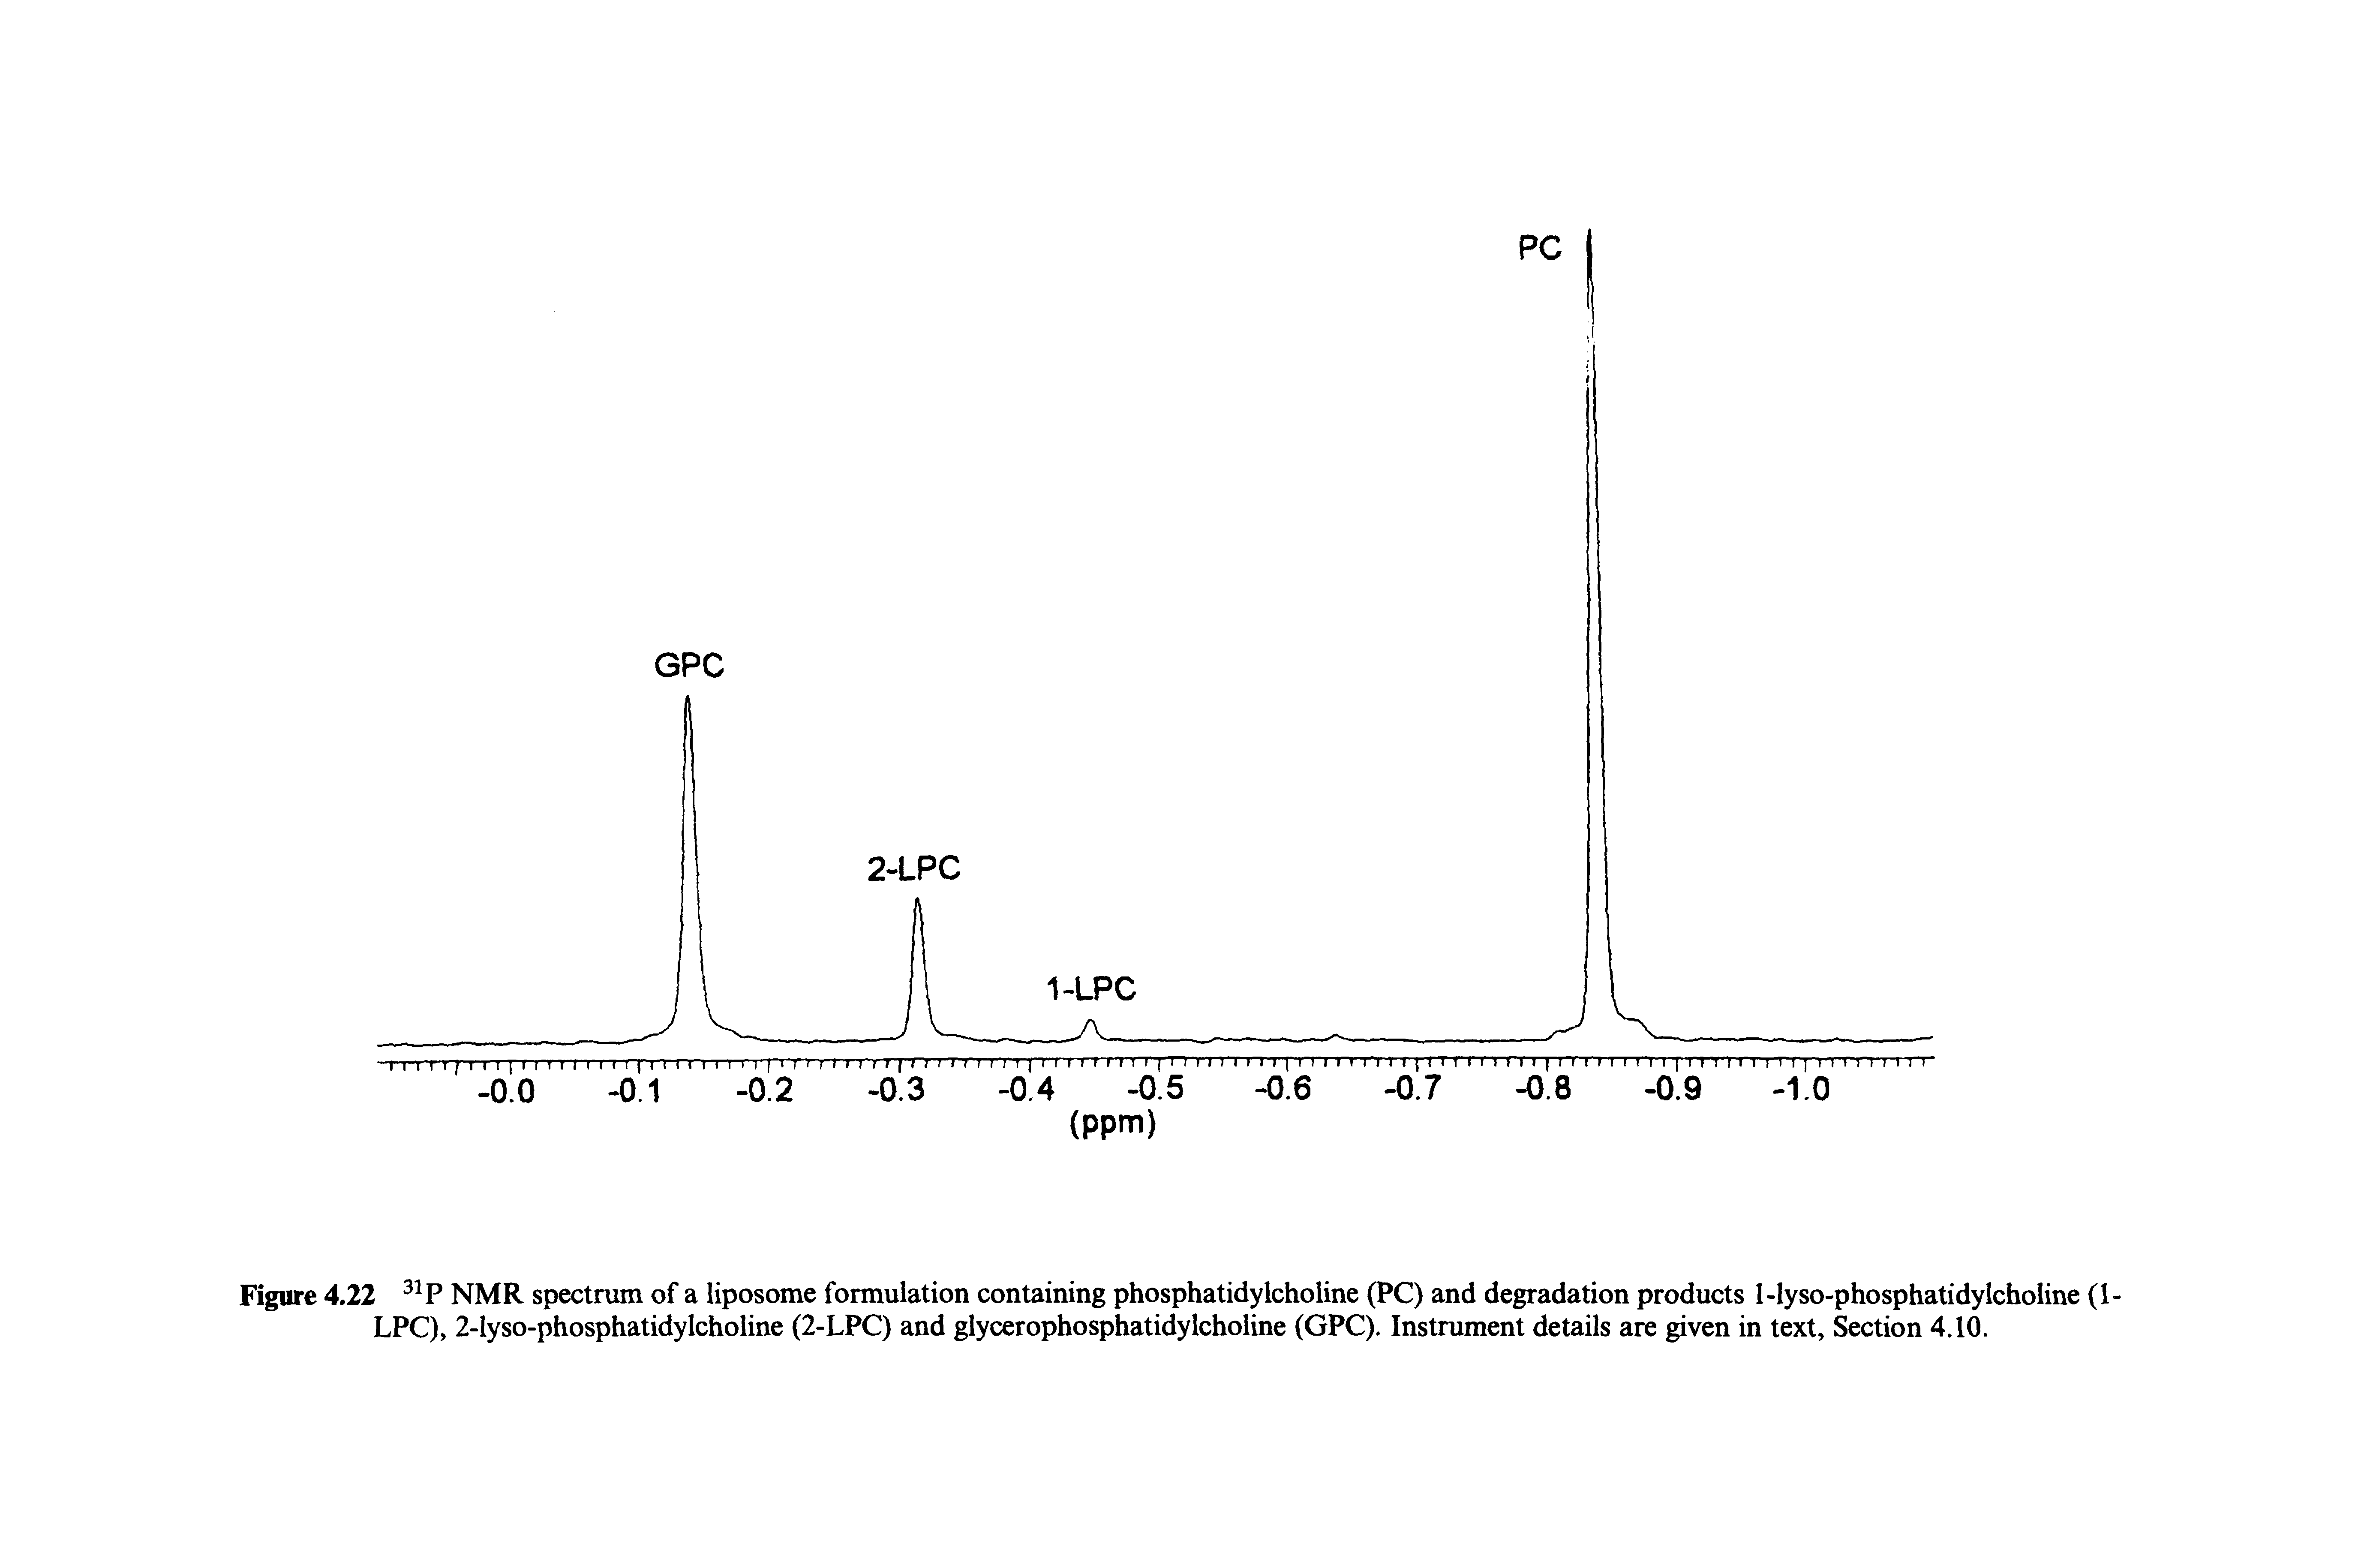 Figure 4.22 NMR spectrum of a liposome formulation containing phosphatidylcholine (PC) and degradation products 1-Iyso-phosphatidylcholine (I-LPC), 2-lyso-phosphatidylcholine (2-LPC) and glycerophosphatidylcholine (GPC). Instrument details are given in text. Section 4.10.